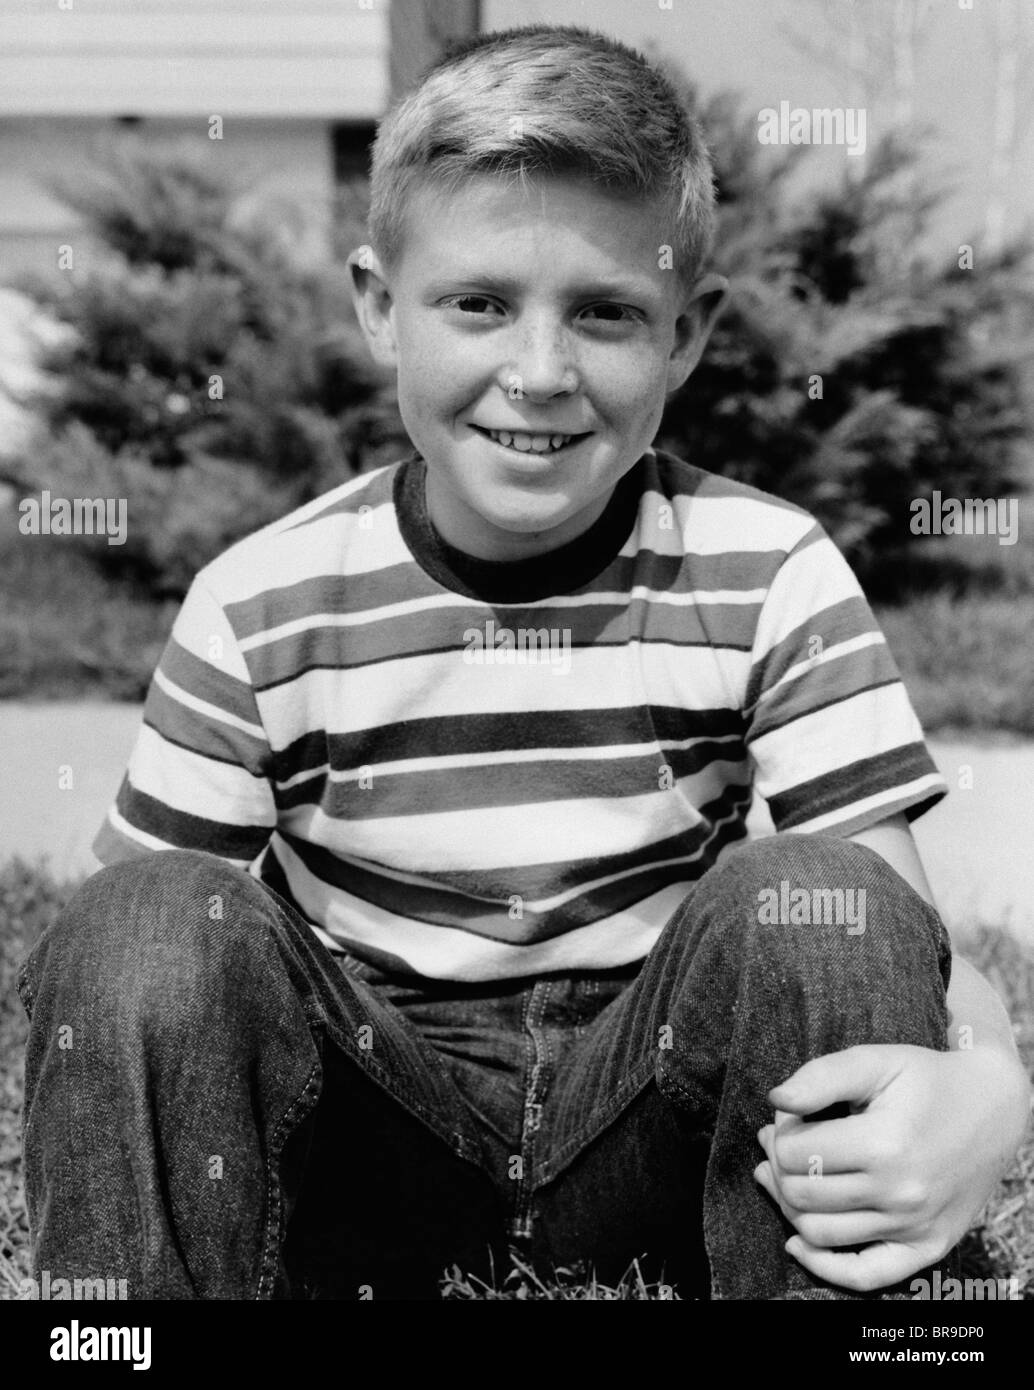 1960s SMILING BOY SITTING WEARING BLUE JEANS AND STRIPED JERSEY SHIRT LOOKING AT CAMERA Stock Photo